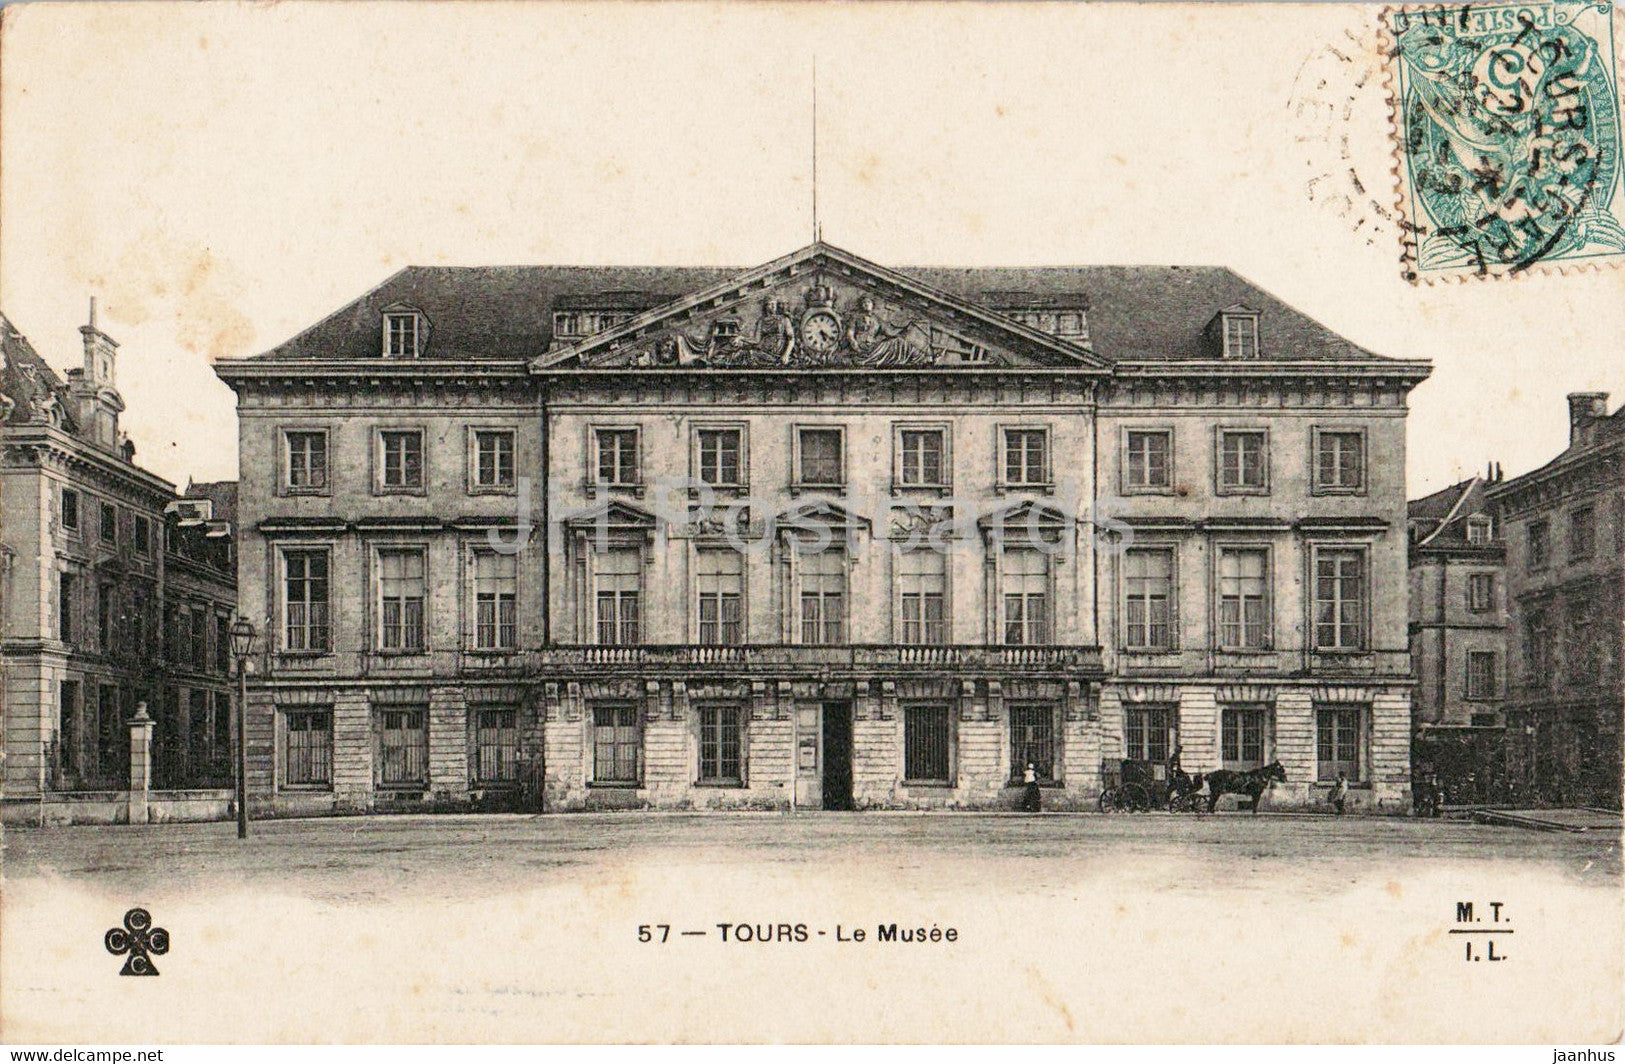 Tours - Le Musee - museum - 57 - old postcard - France - used - JH Postcards